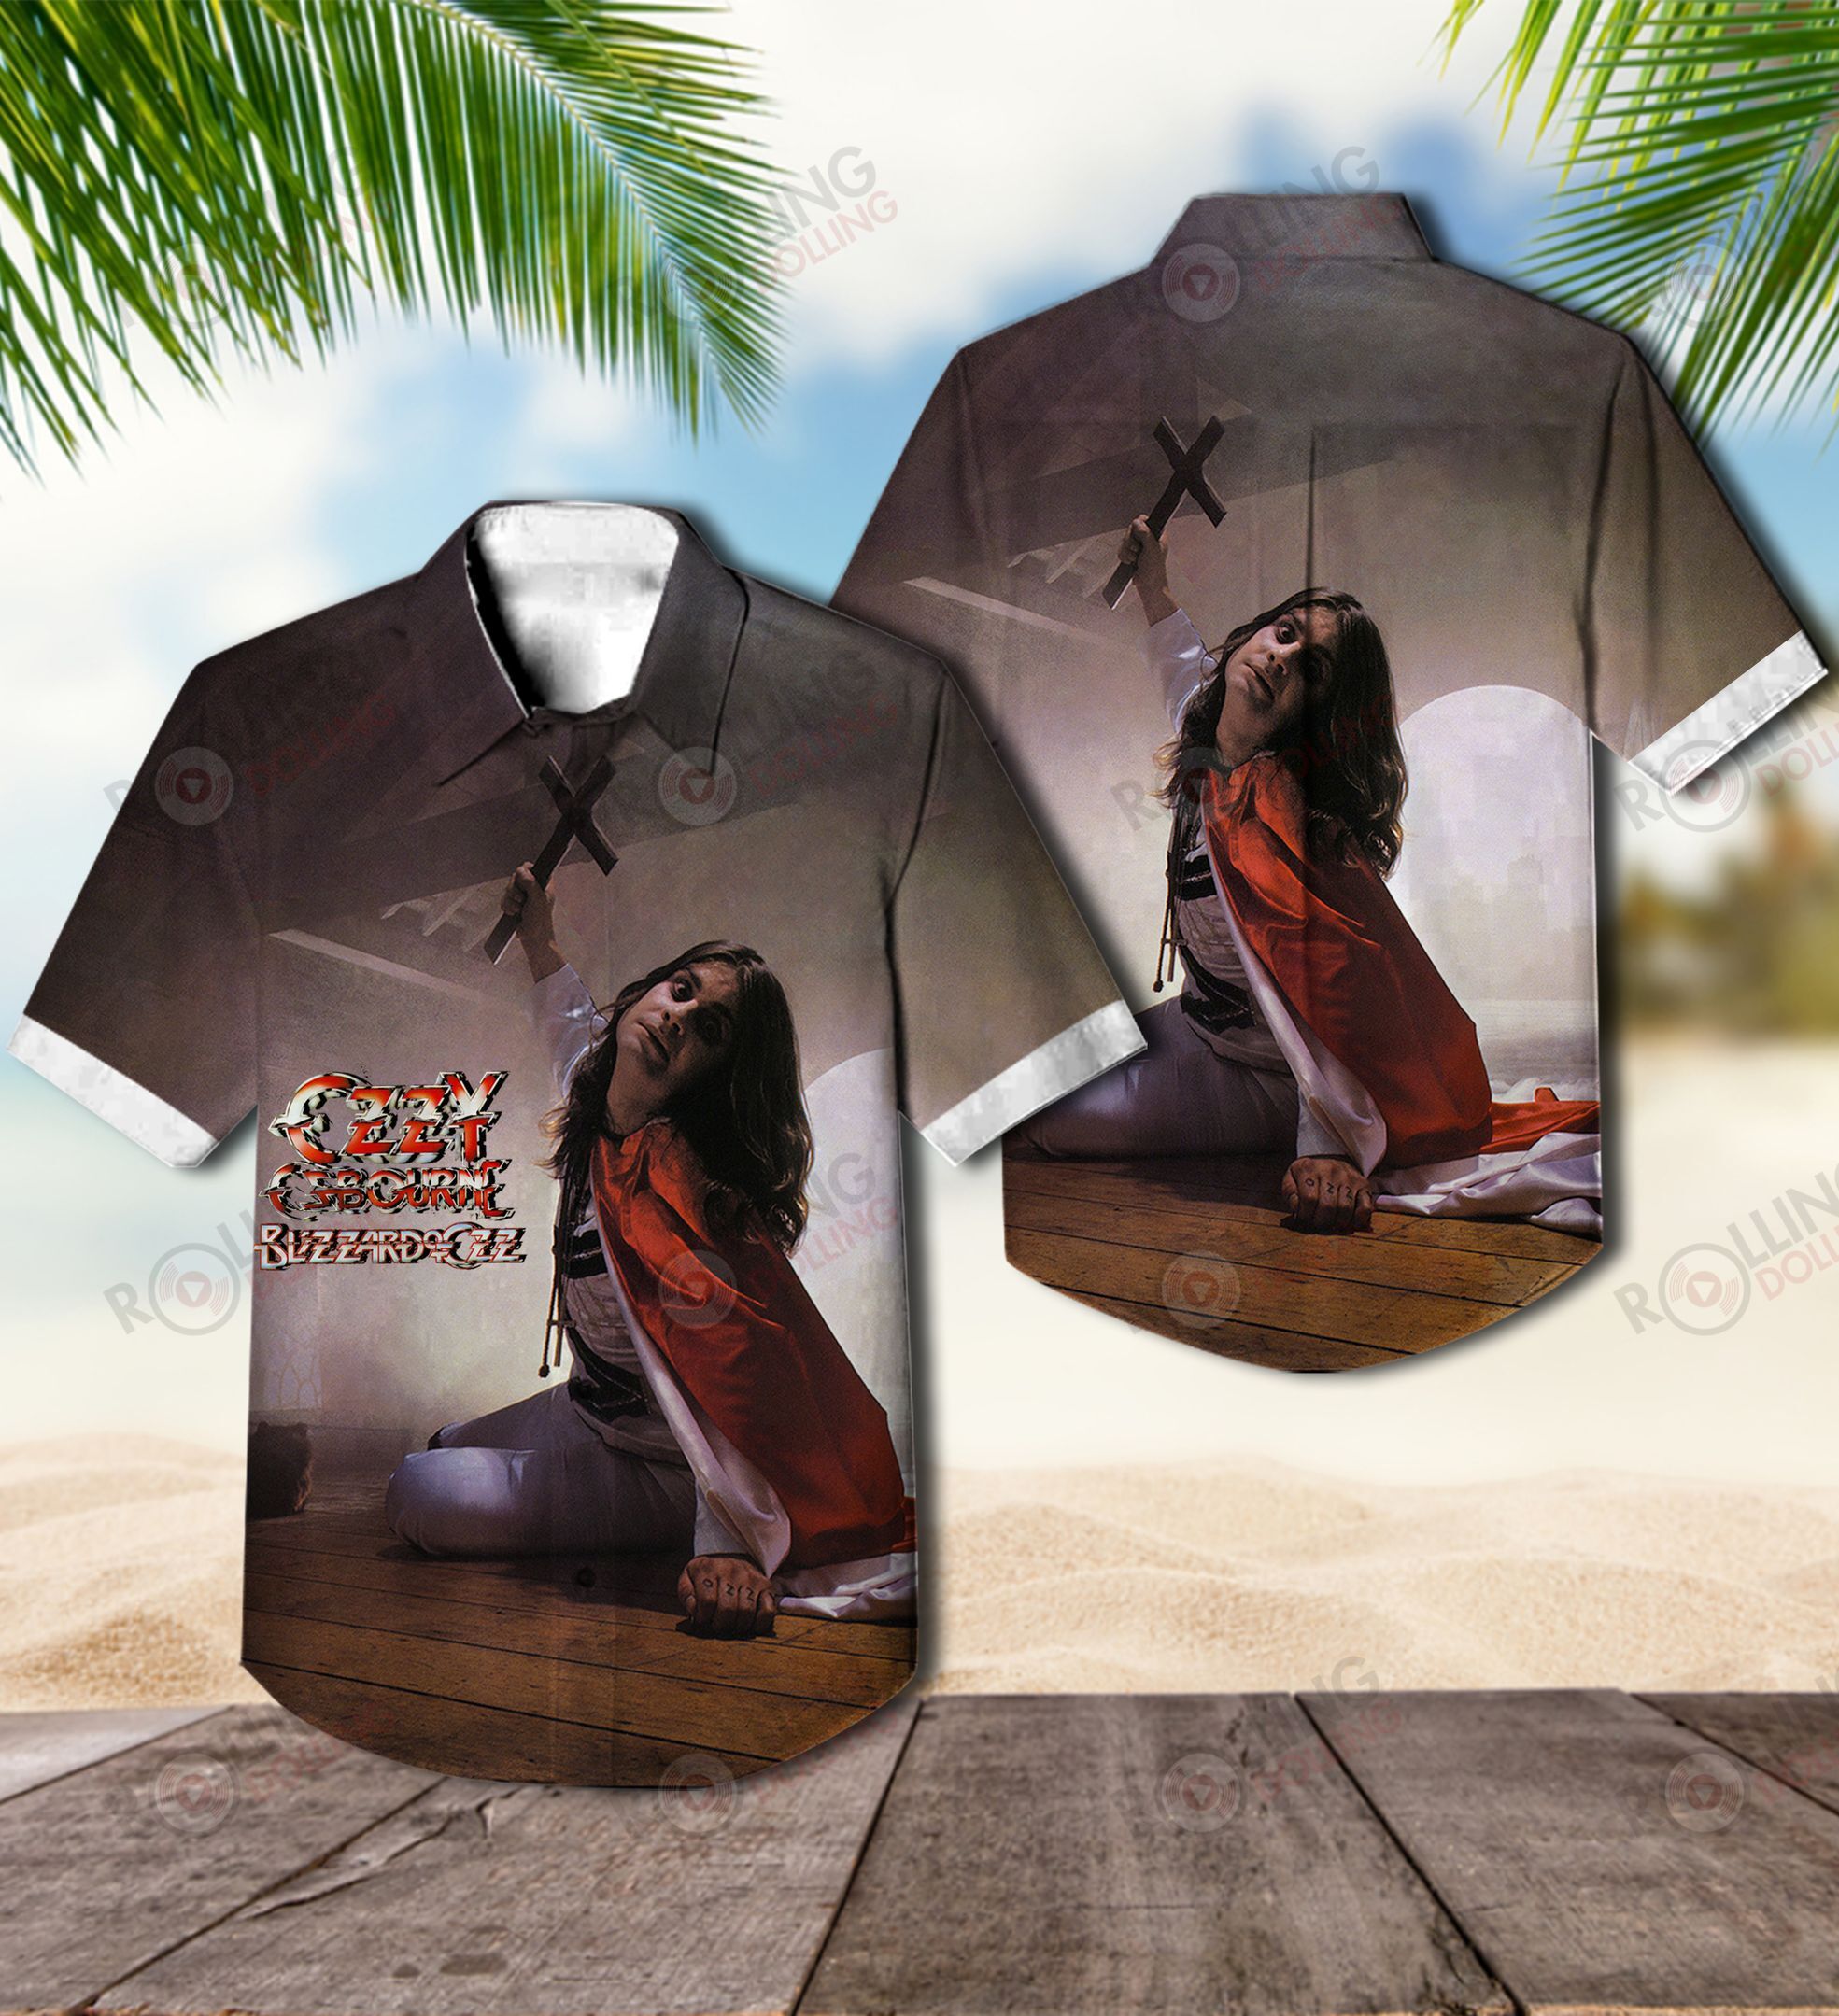 Check out these top 100+ Hawaiian shirt so cool for rock fans 105